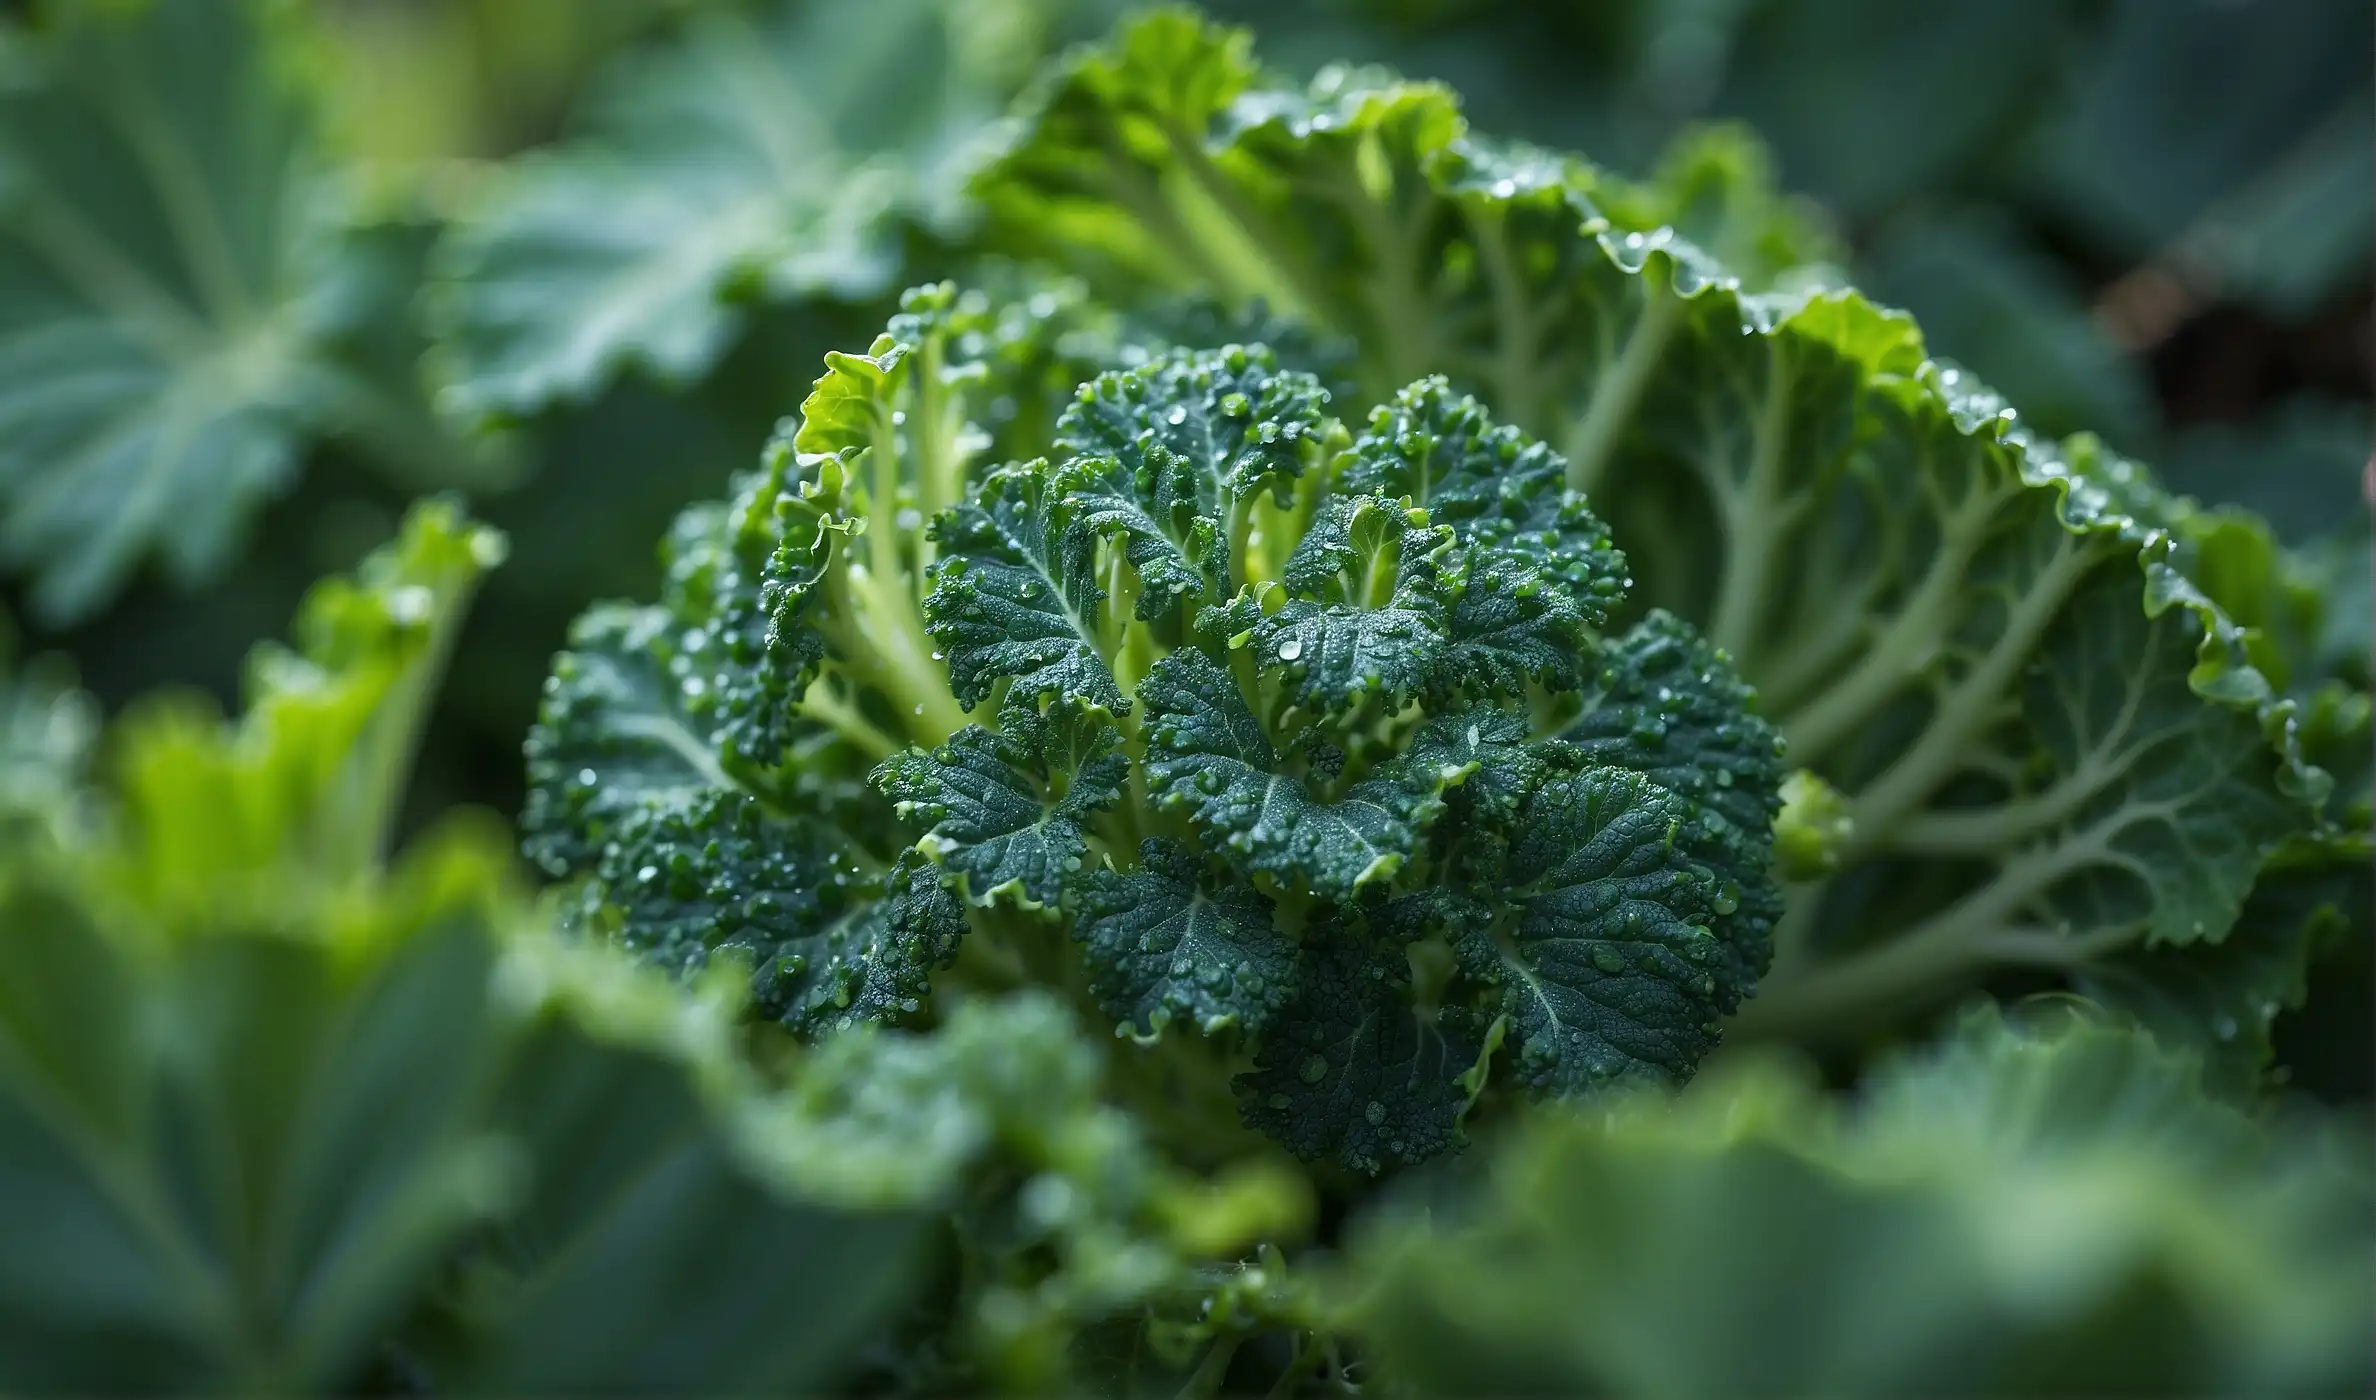 How to Regrow Broccoli: 5 Easy Steps to Unlimited Greens